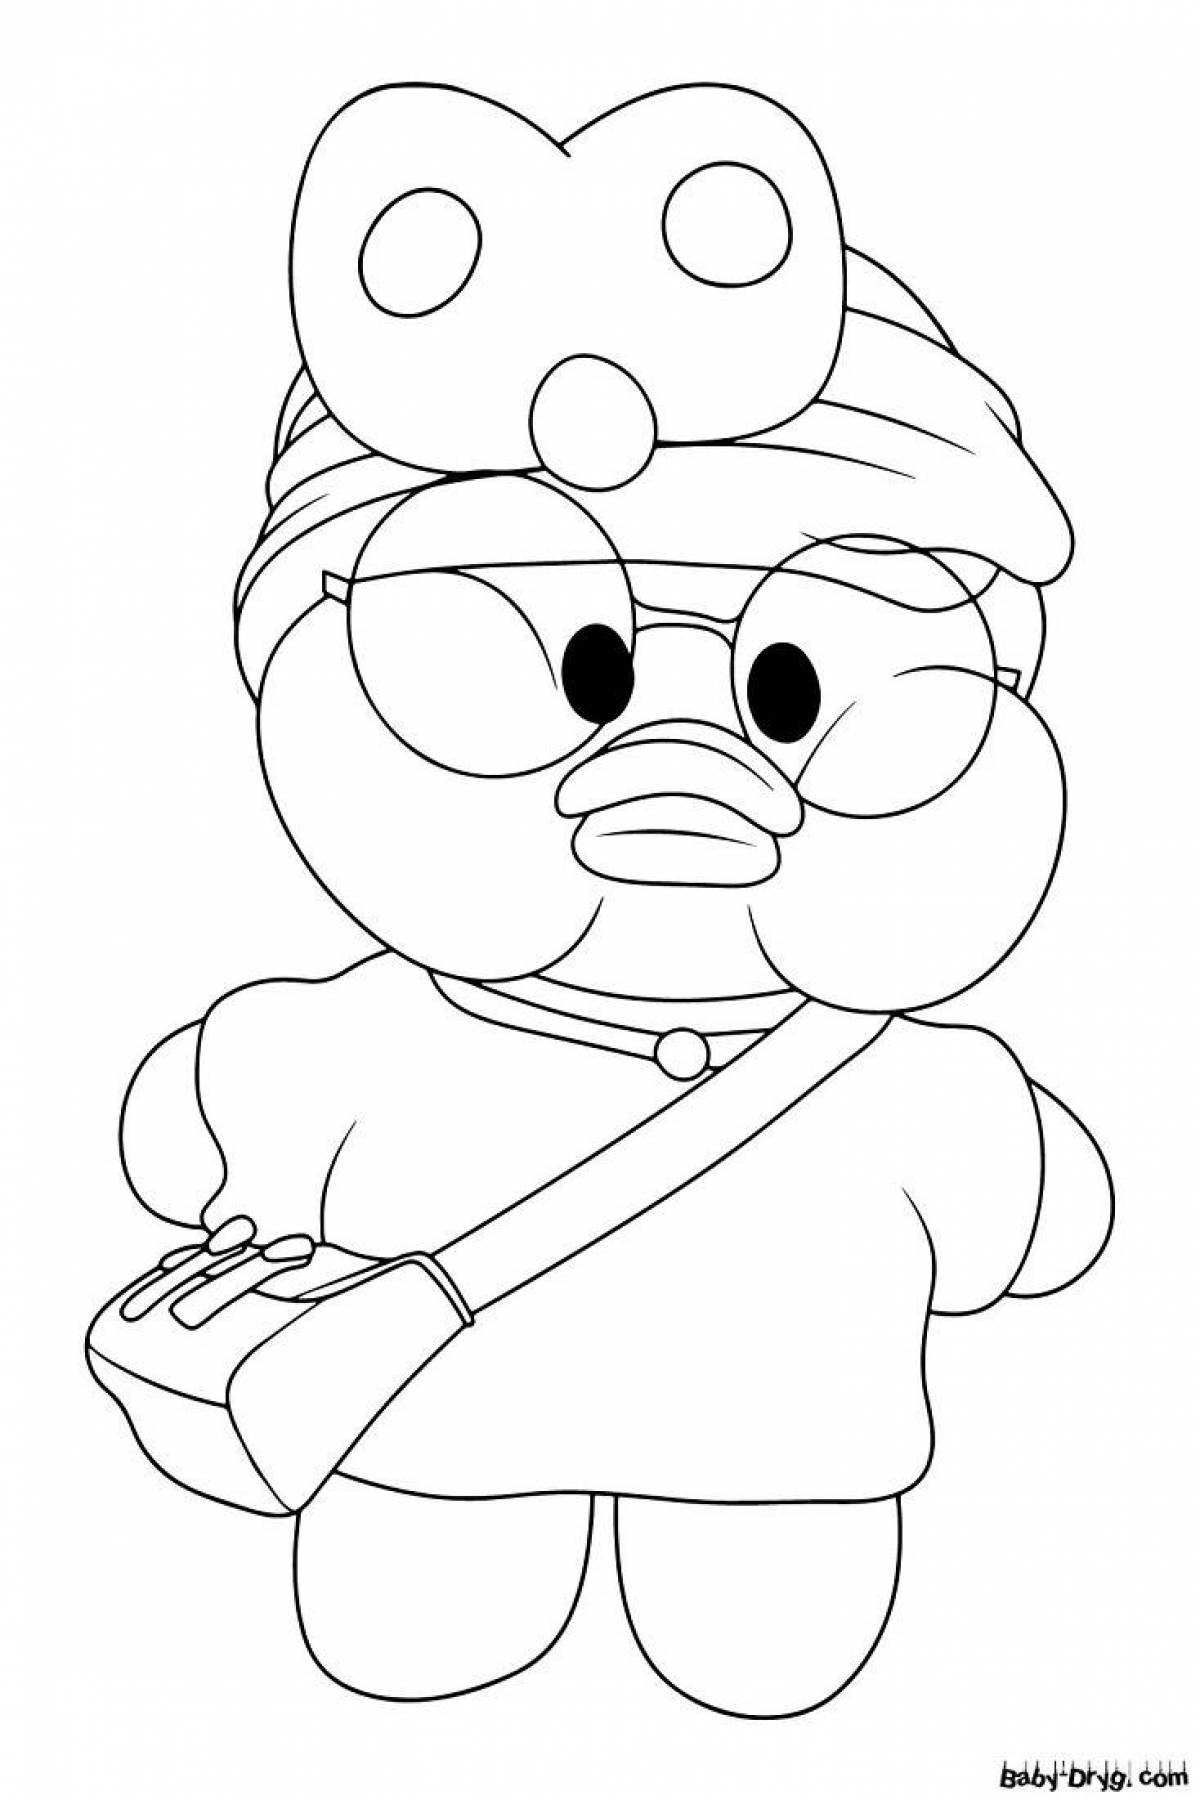 Charming duck lalafanfan coloring pages